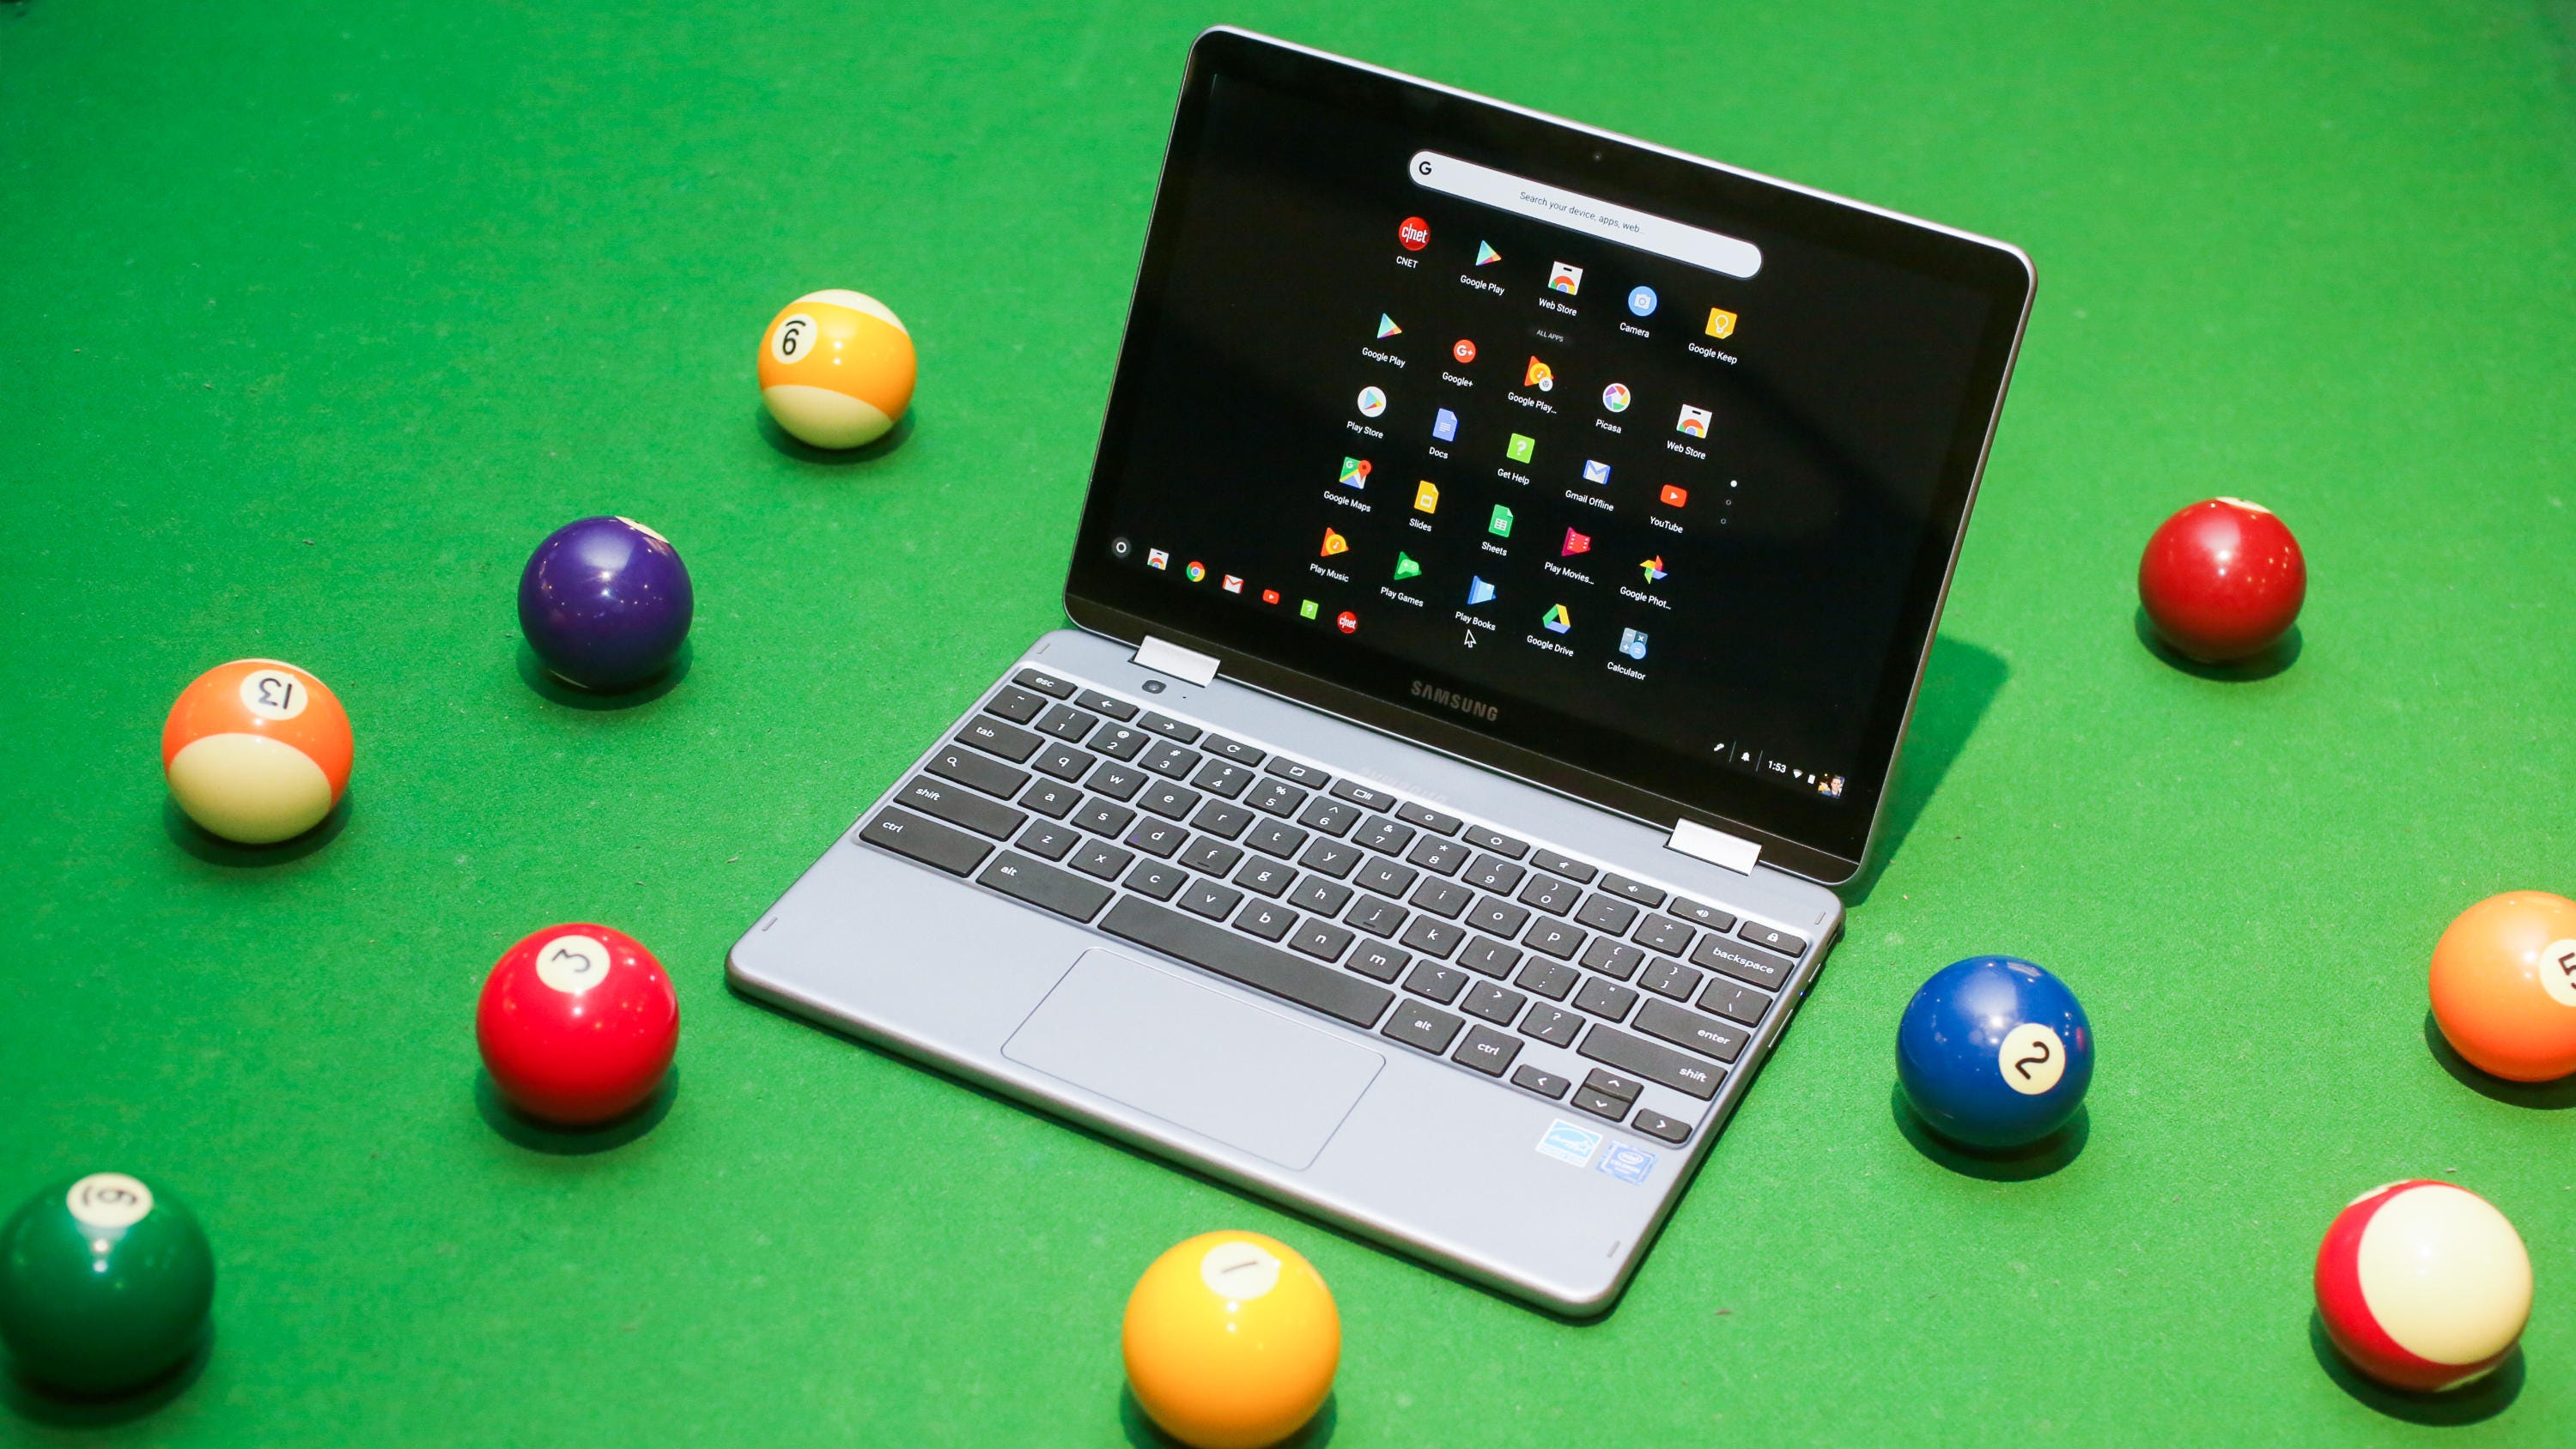 Buying a Cyber Monday Chromebook? Read this first